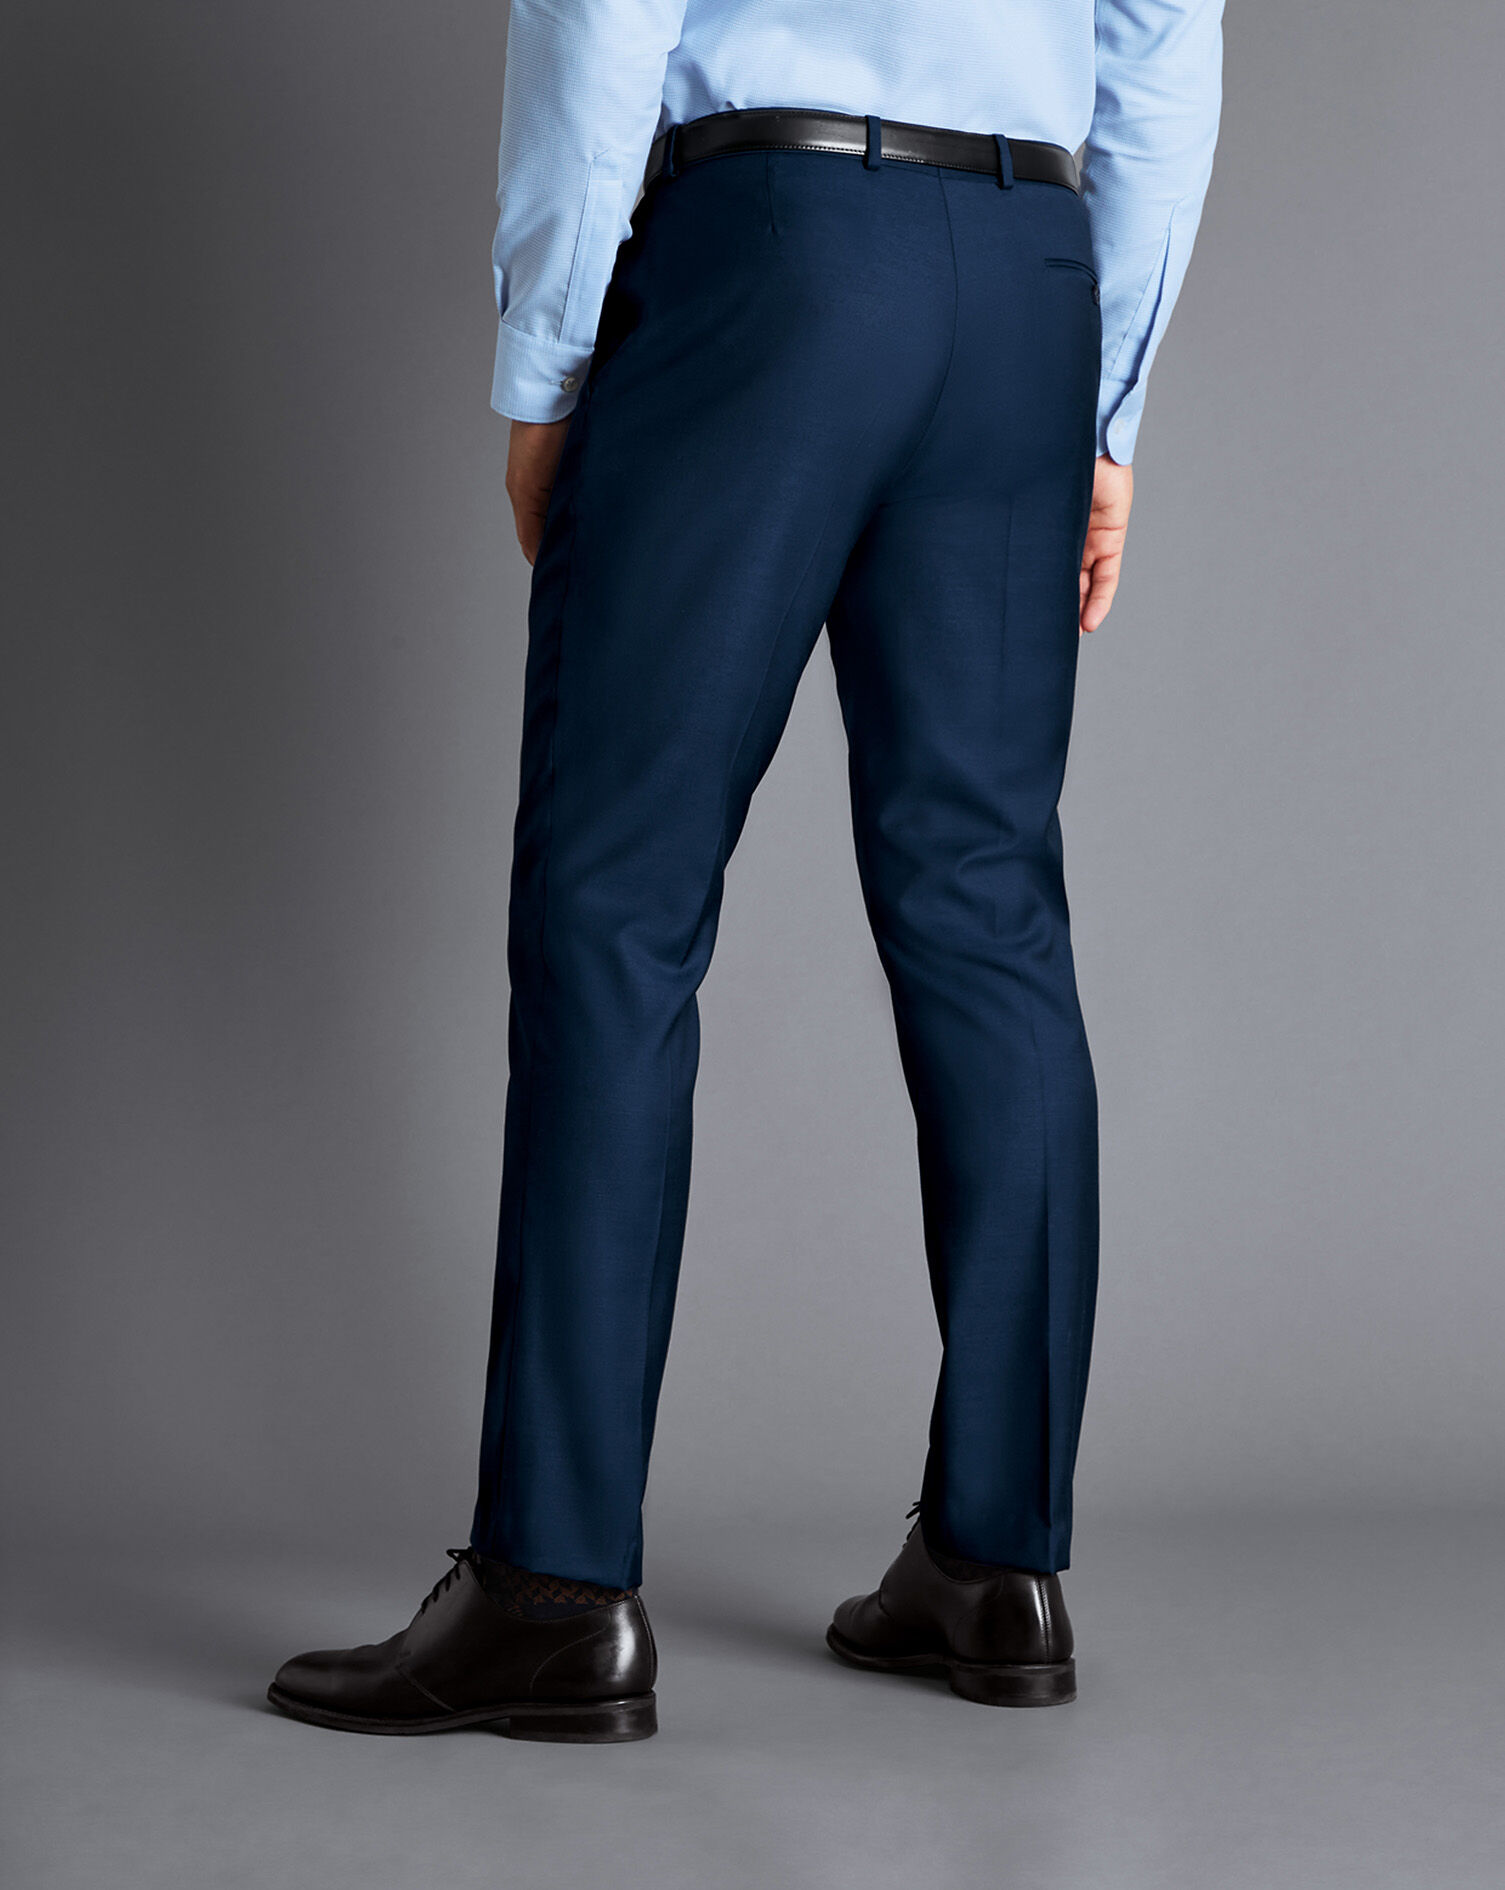 Mens Trousers Sale  Cheap Formal Trousers  Moss